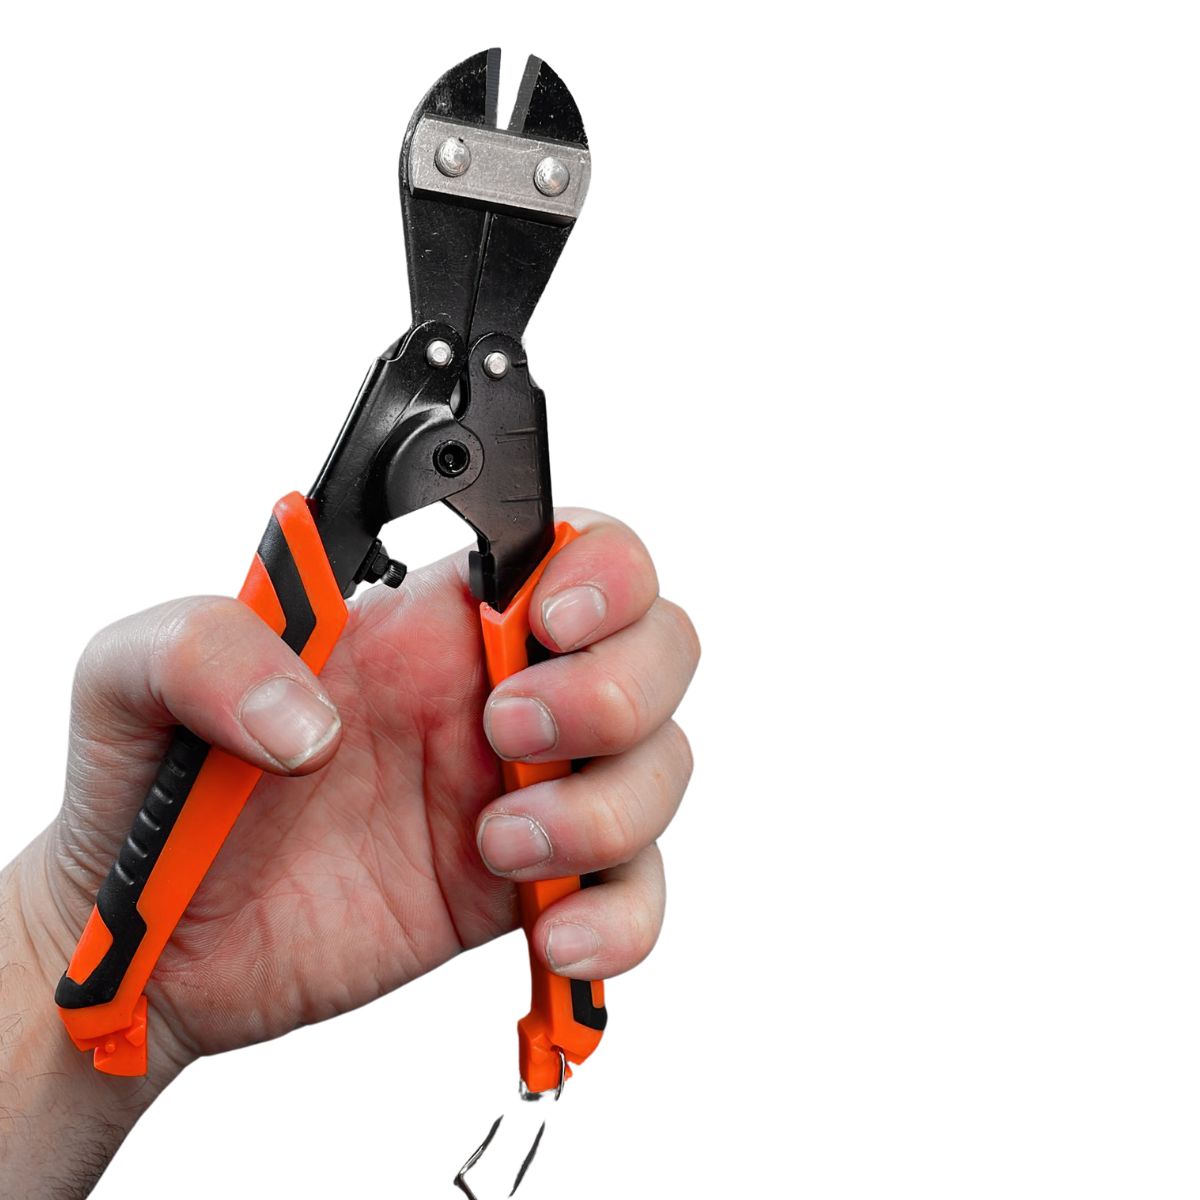 Bolt Cutters (8.5") - South East Clearance Centre